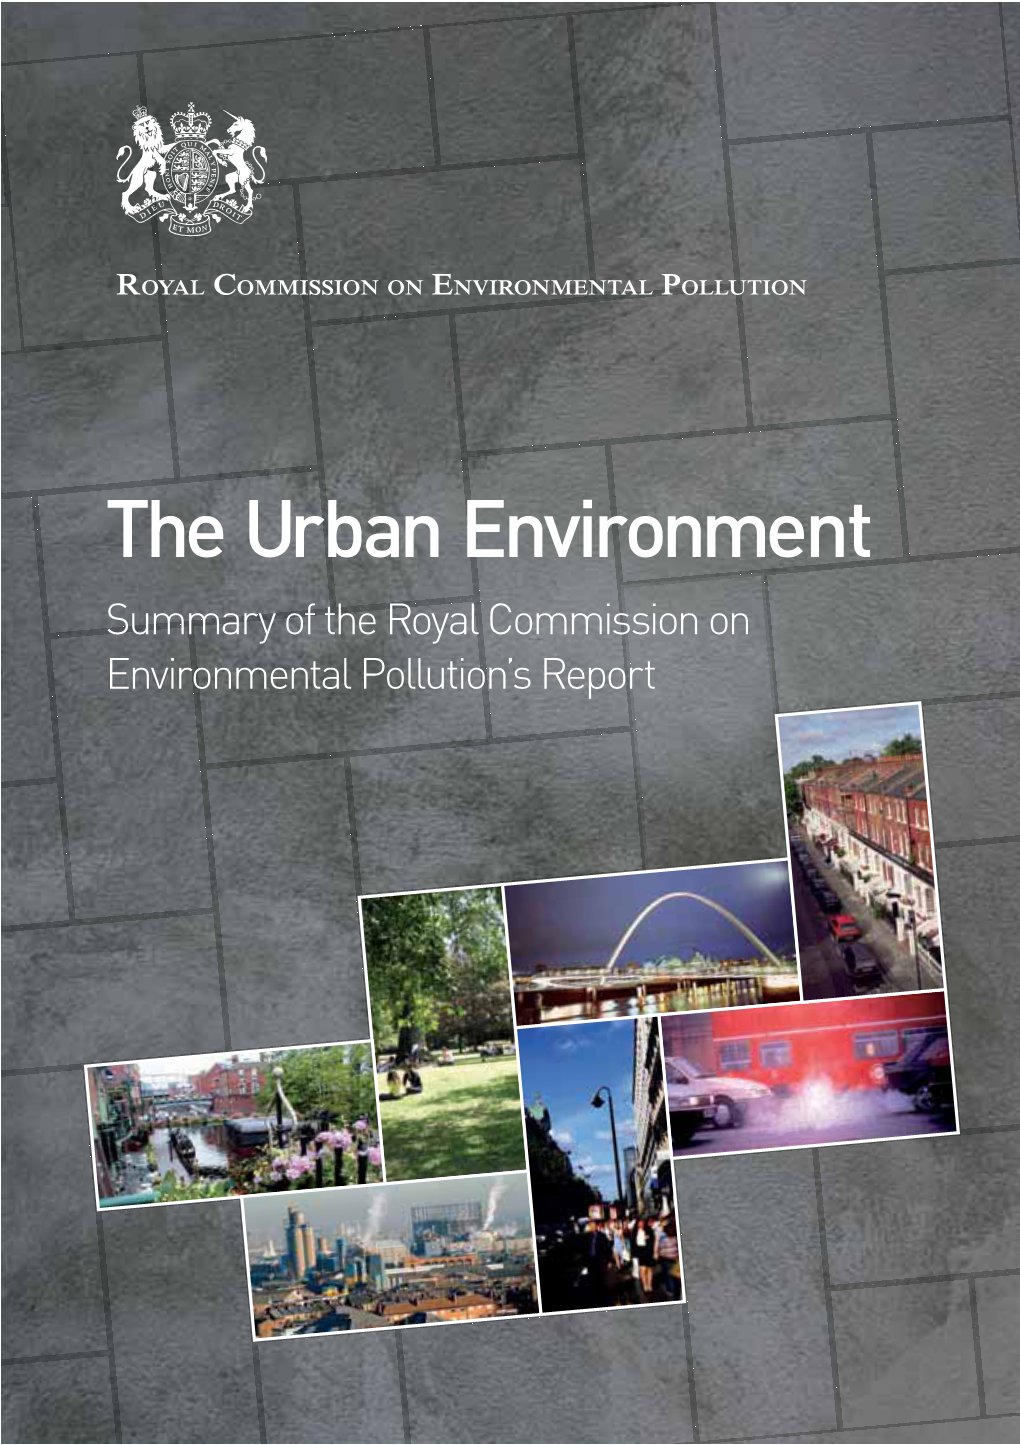 The Urban Environment Summary of the Royal Commission on Environmental Pollution’S Report About the Royal Commission’S Study on the Urban Environment